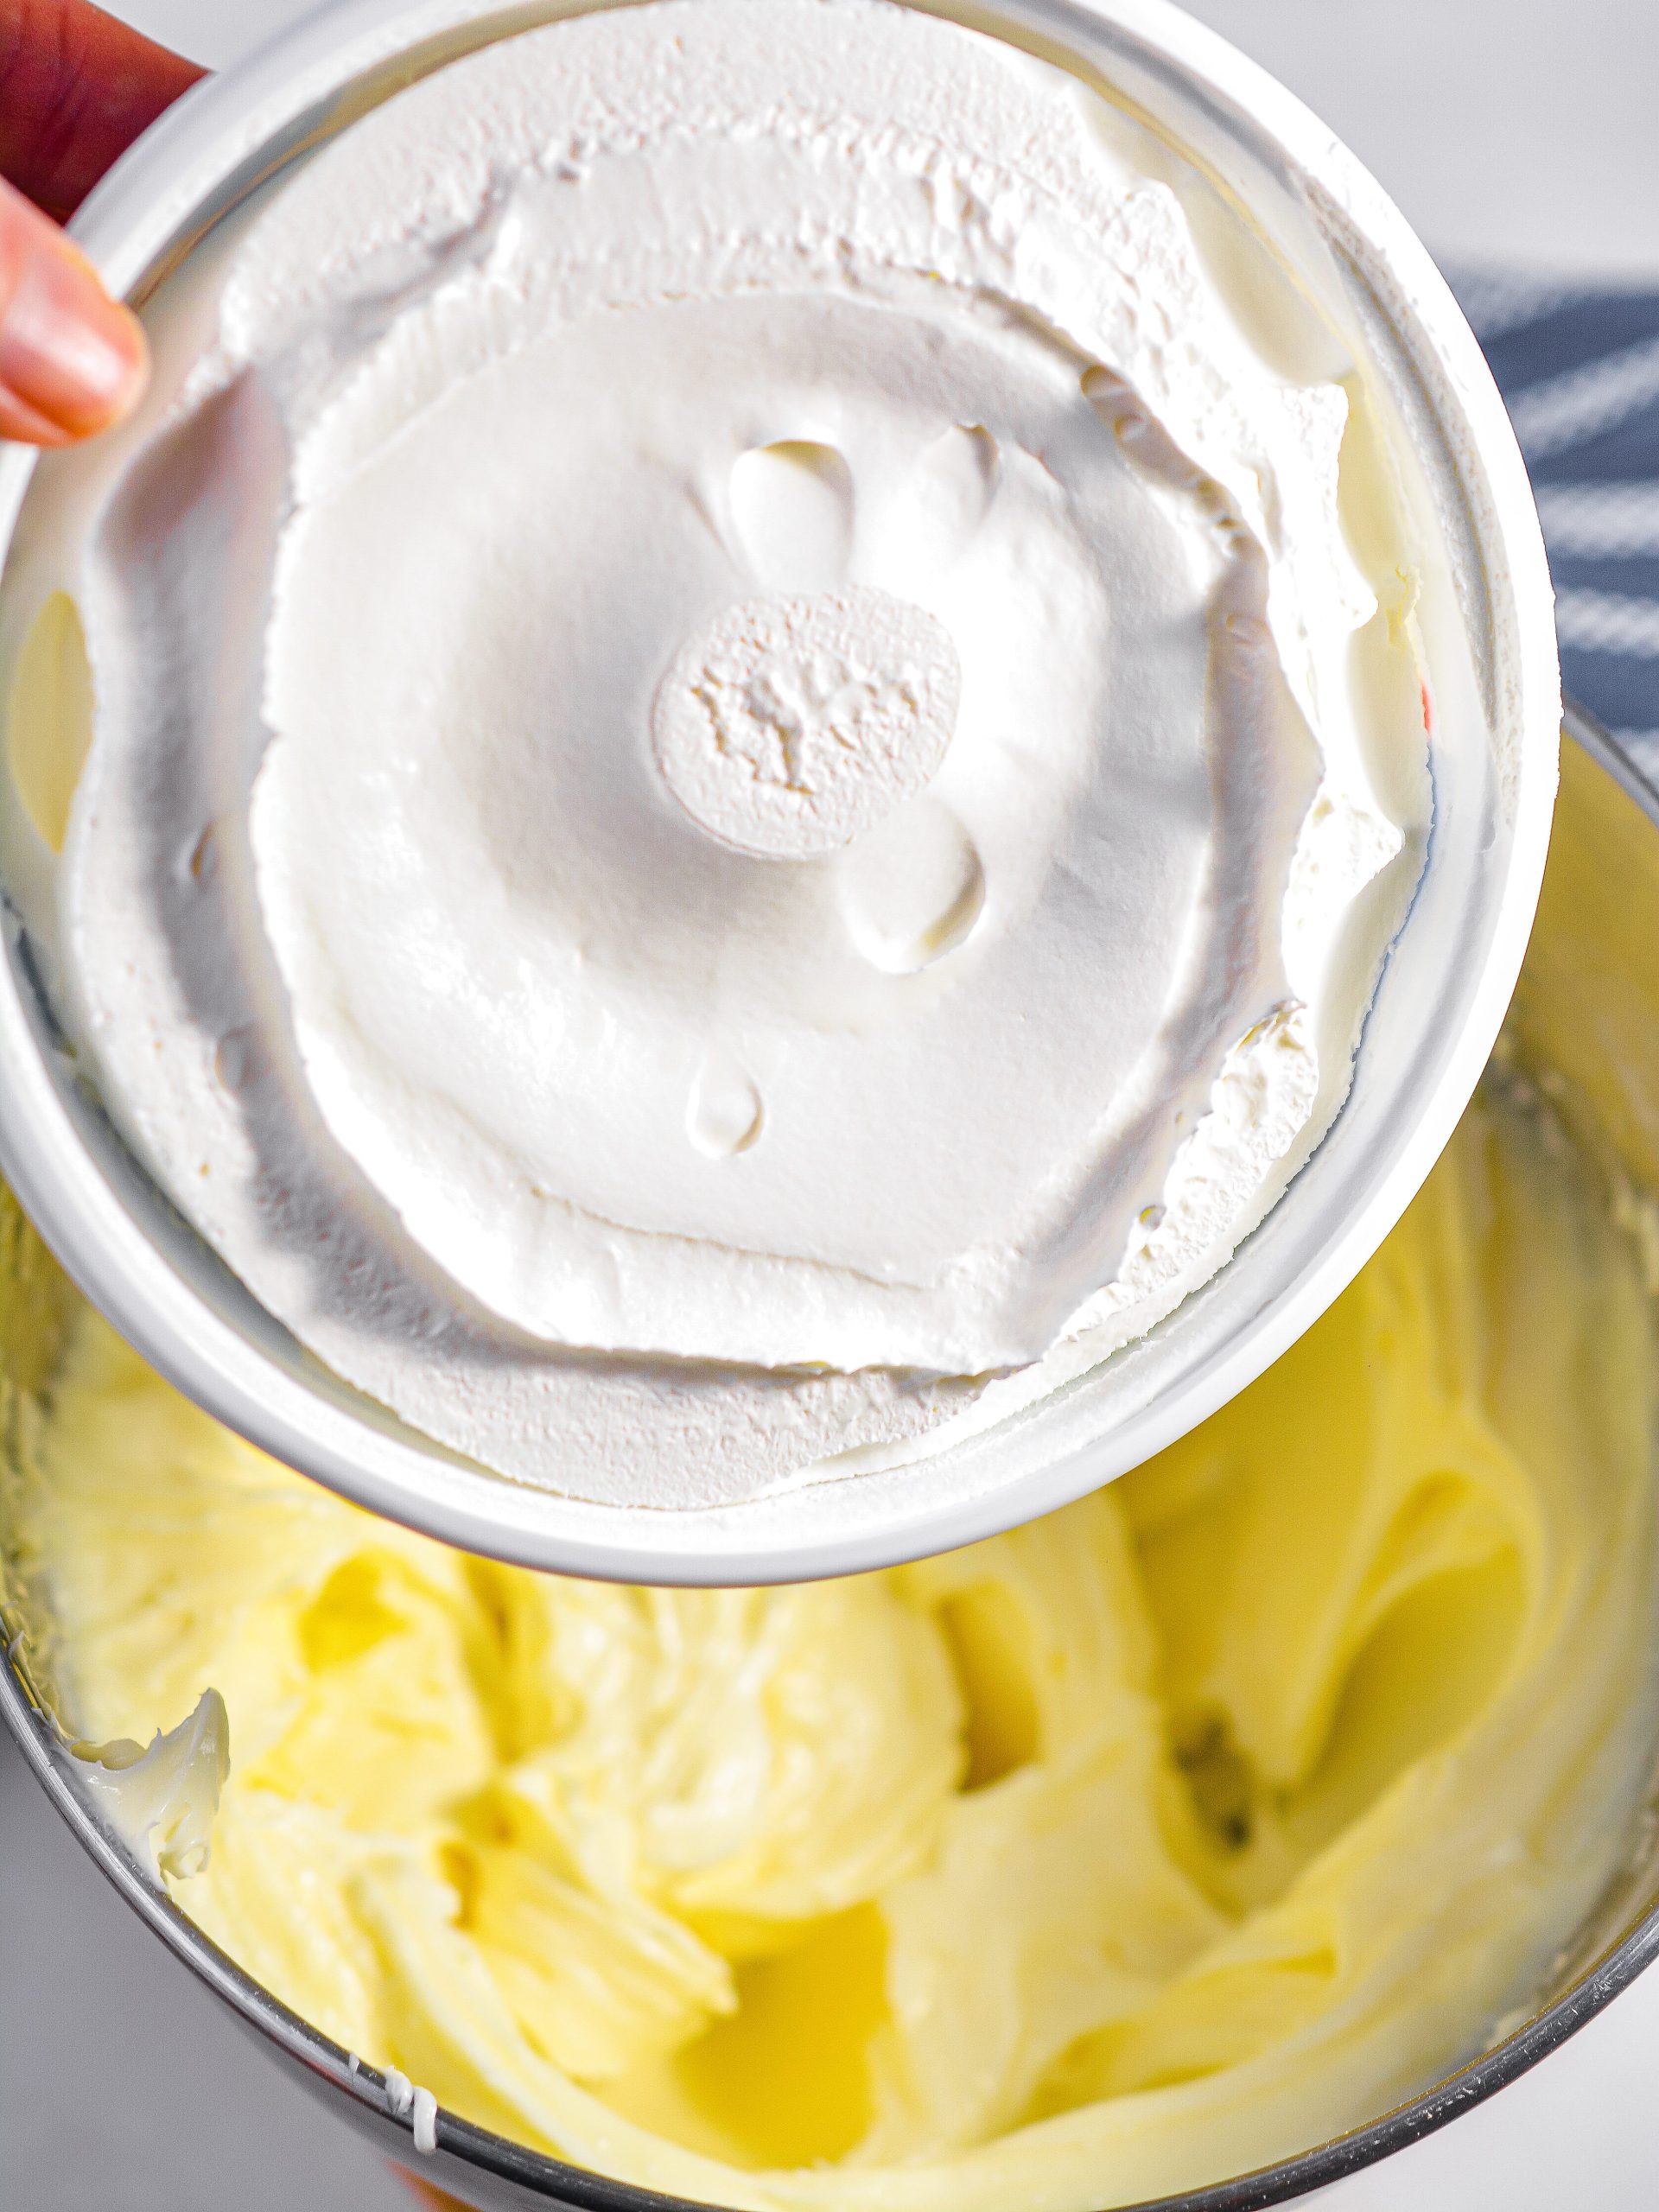 Fold the cool whip into the cream cheese mixture.